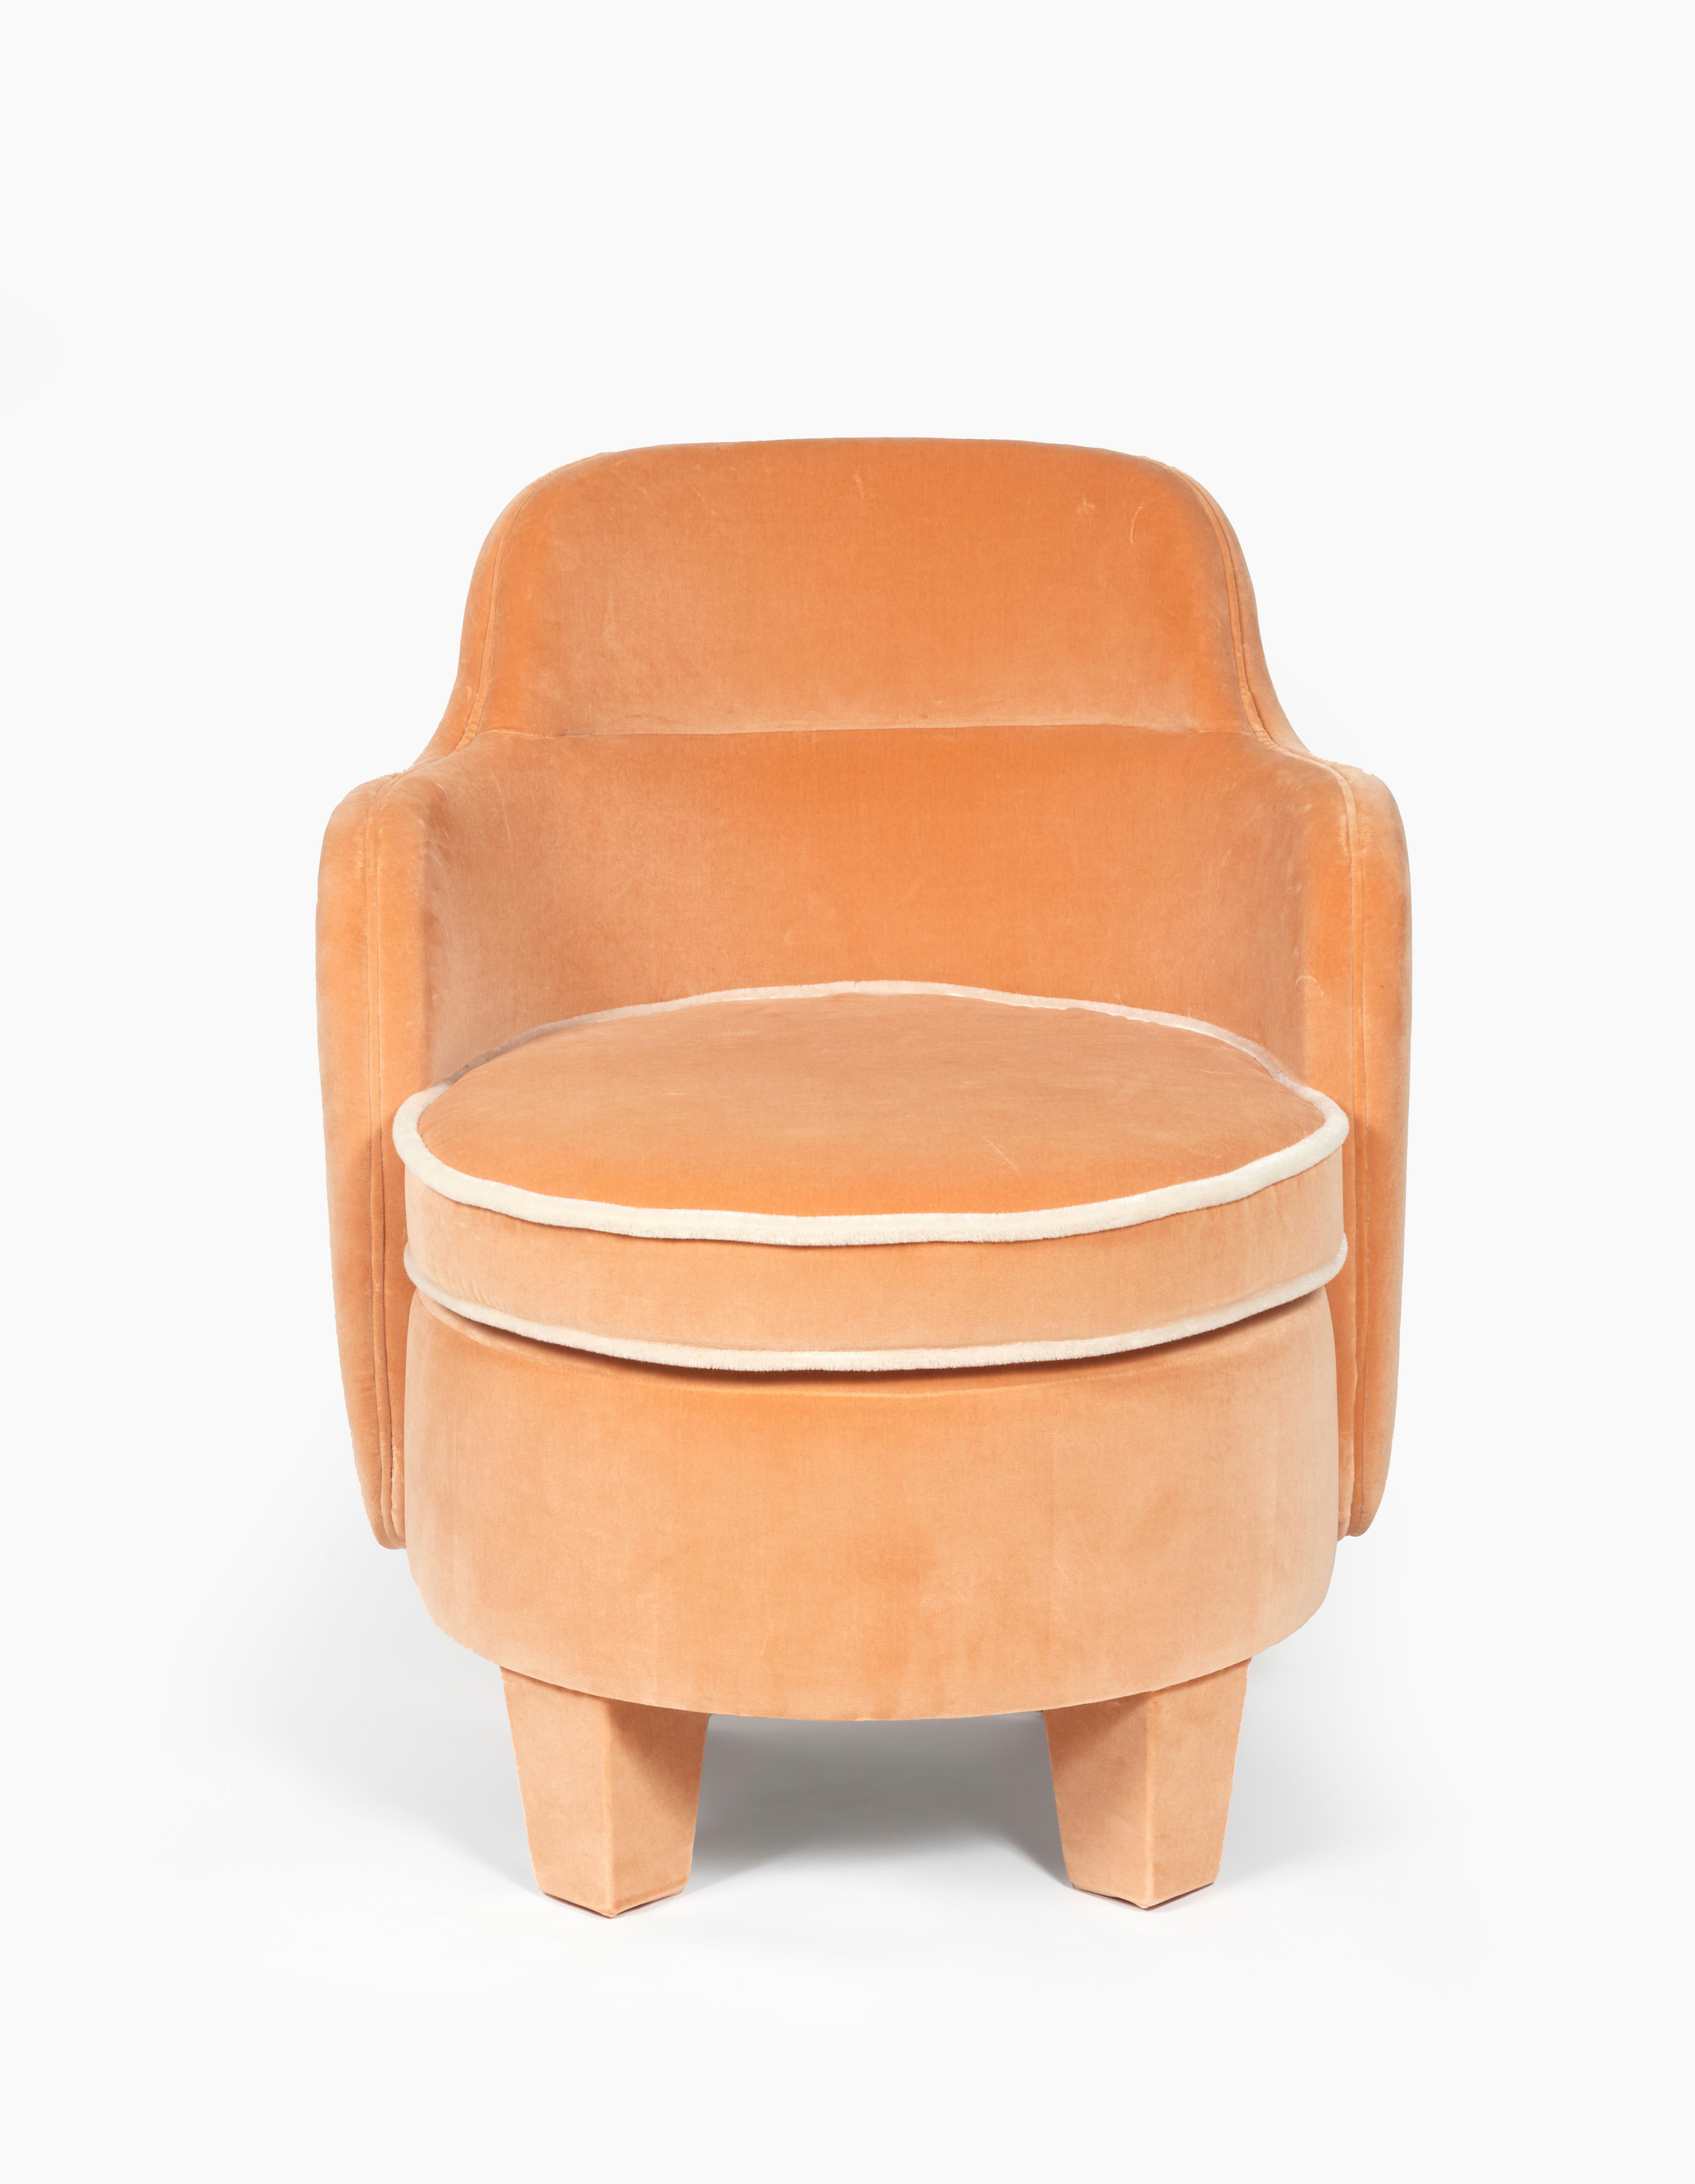 The Baba armchair was designed and imagined for a residential project in Paris. 
Its iconic design was inspired by the floral shapes of 70s furniture.
The size of this piece fits perfectly with a small area like angles of a bathroom or a bedroom.